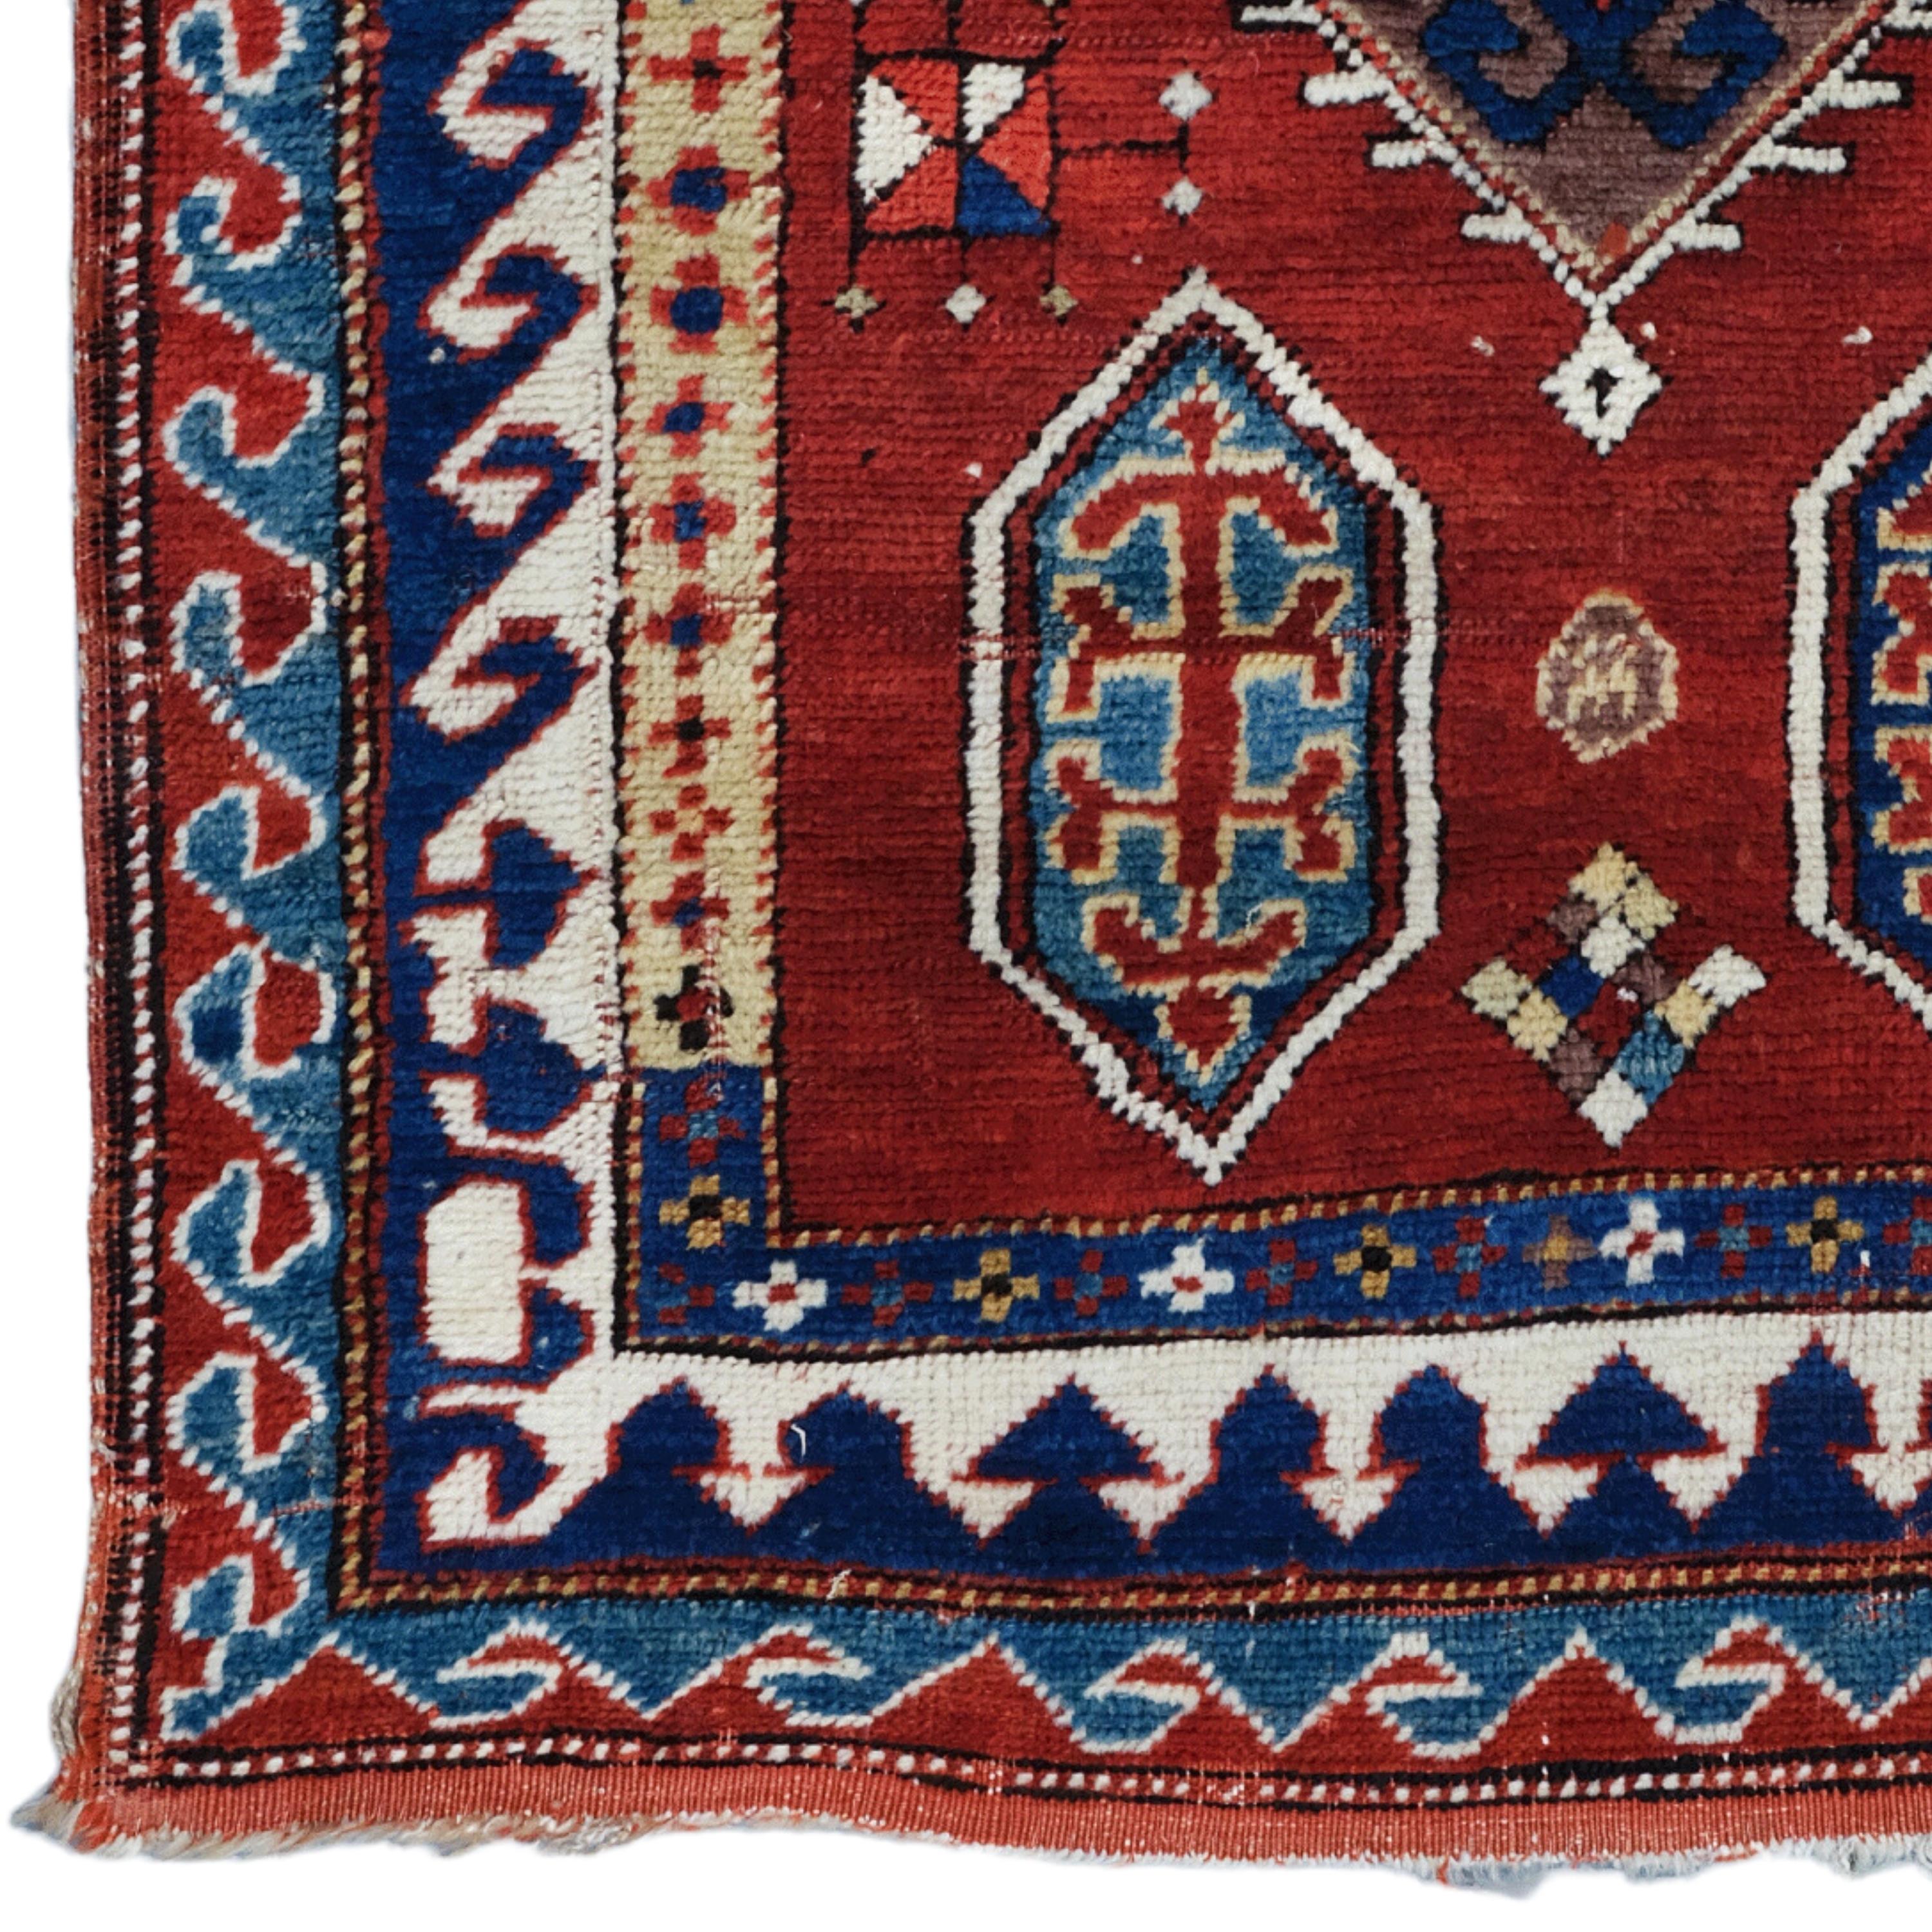 19th Century Bordjalou Rug - Handwoven Antique Caucasian Rug

This elegant 19th century Bordjalou rug will add an authentic touch to your space with its historical texture and rich color palette. This rare piece, measuring 85x154 cm, presents the